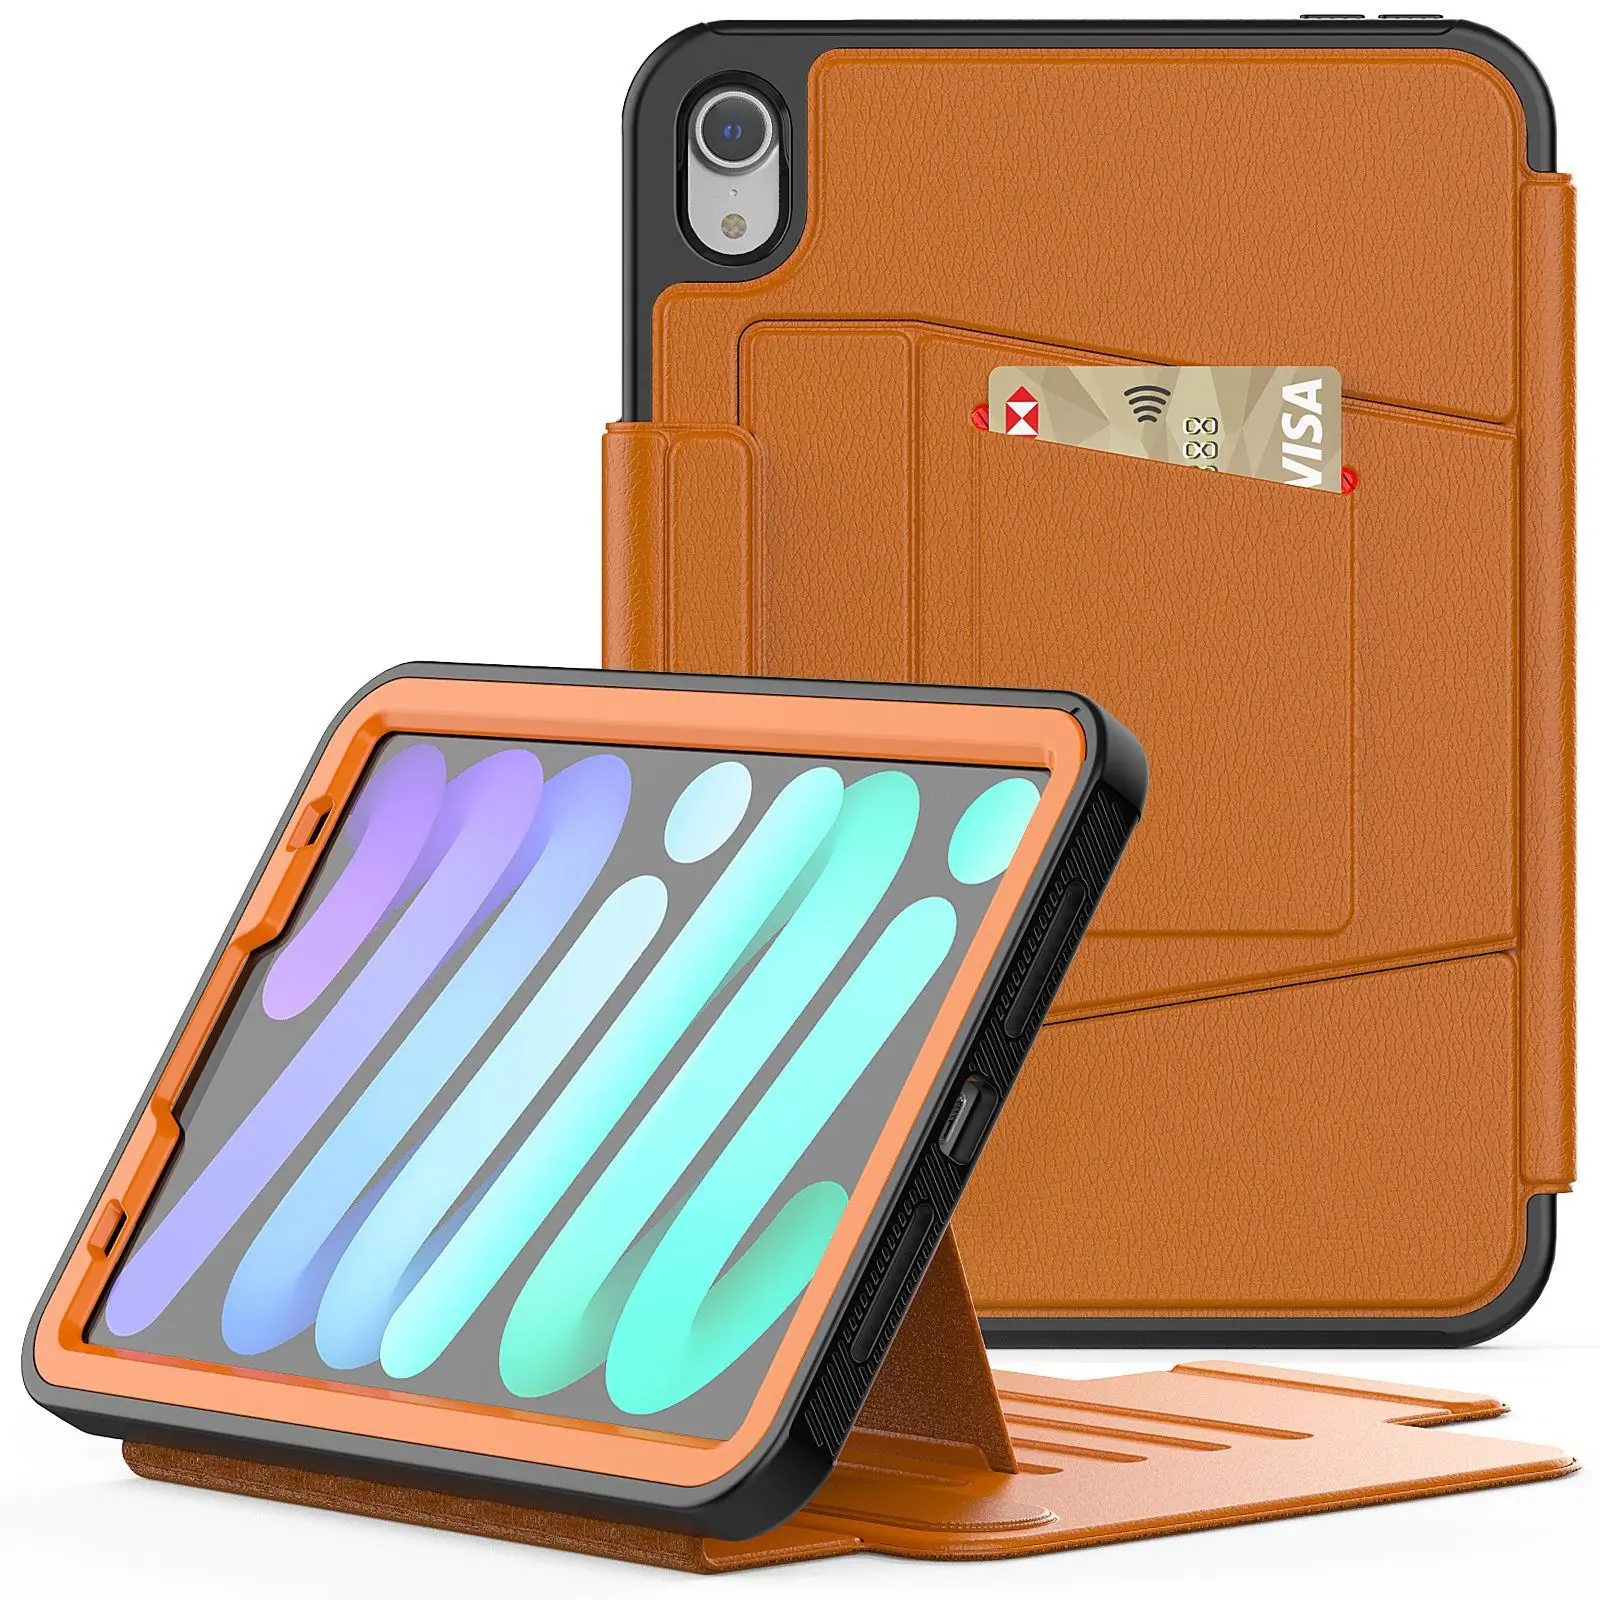 9 Generations Tablet Case Protect Shell For Apple Ipad Protect Leather Case For Ipad 9.7 7 8 9 Th Gen 2020 2019 10.2 Inch Tablet